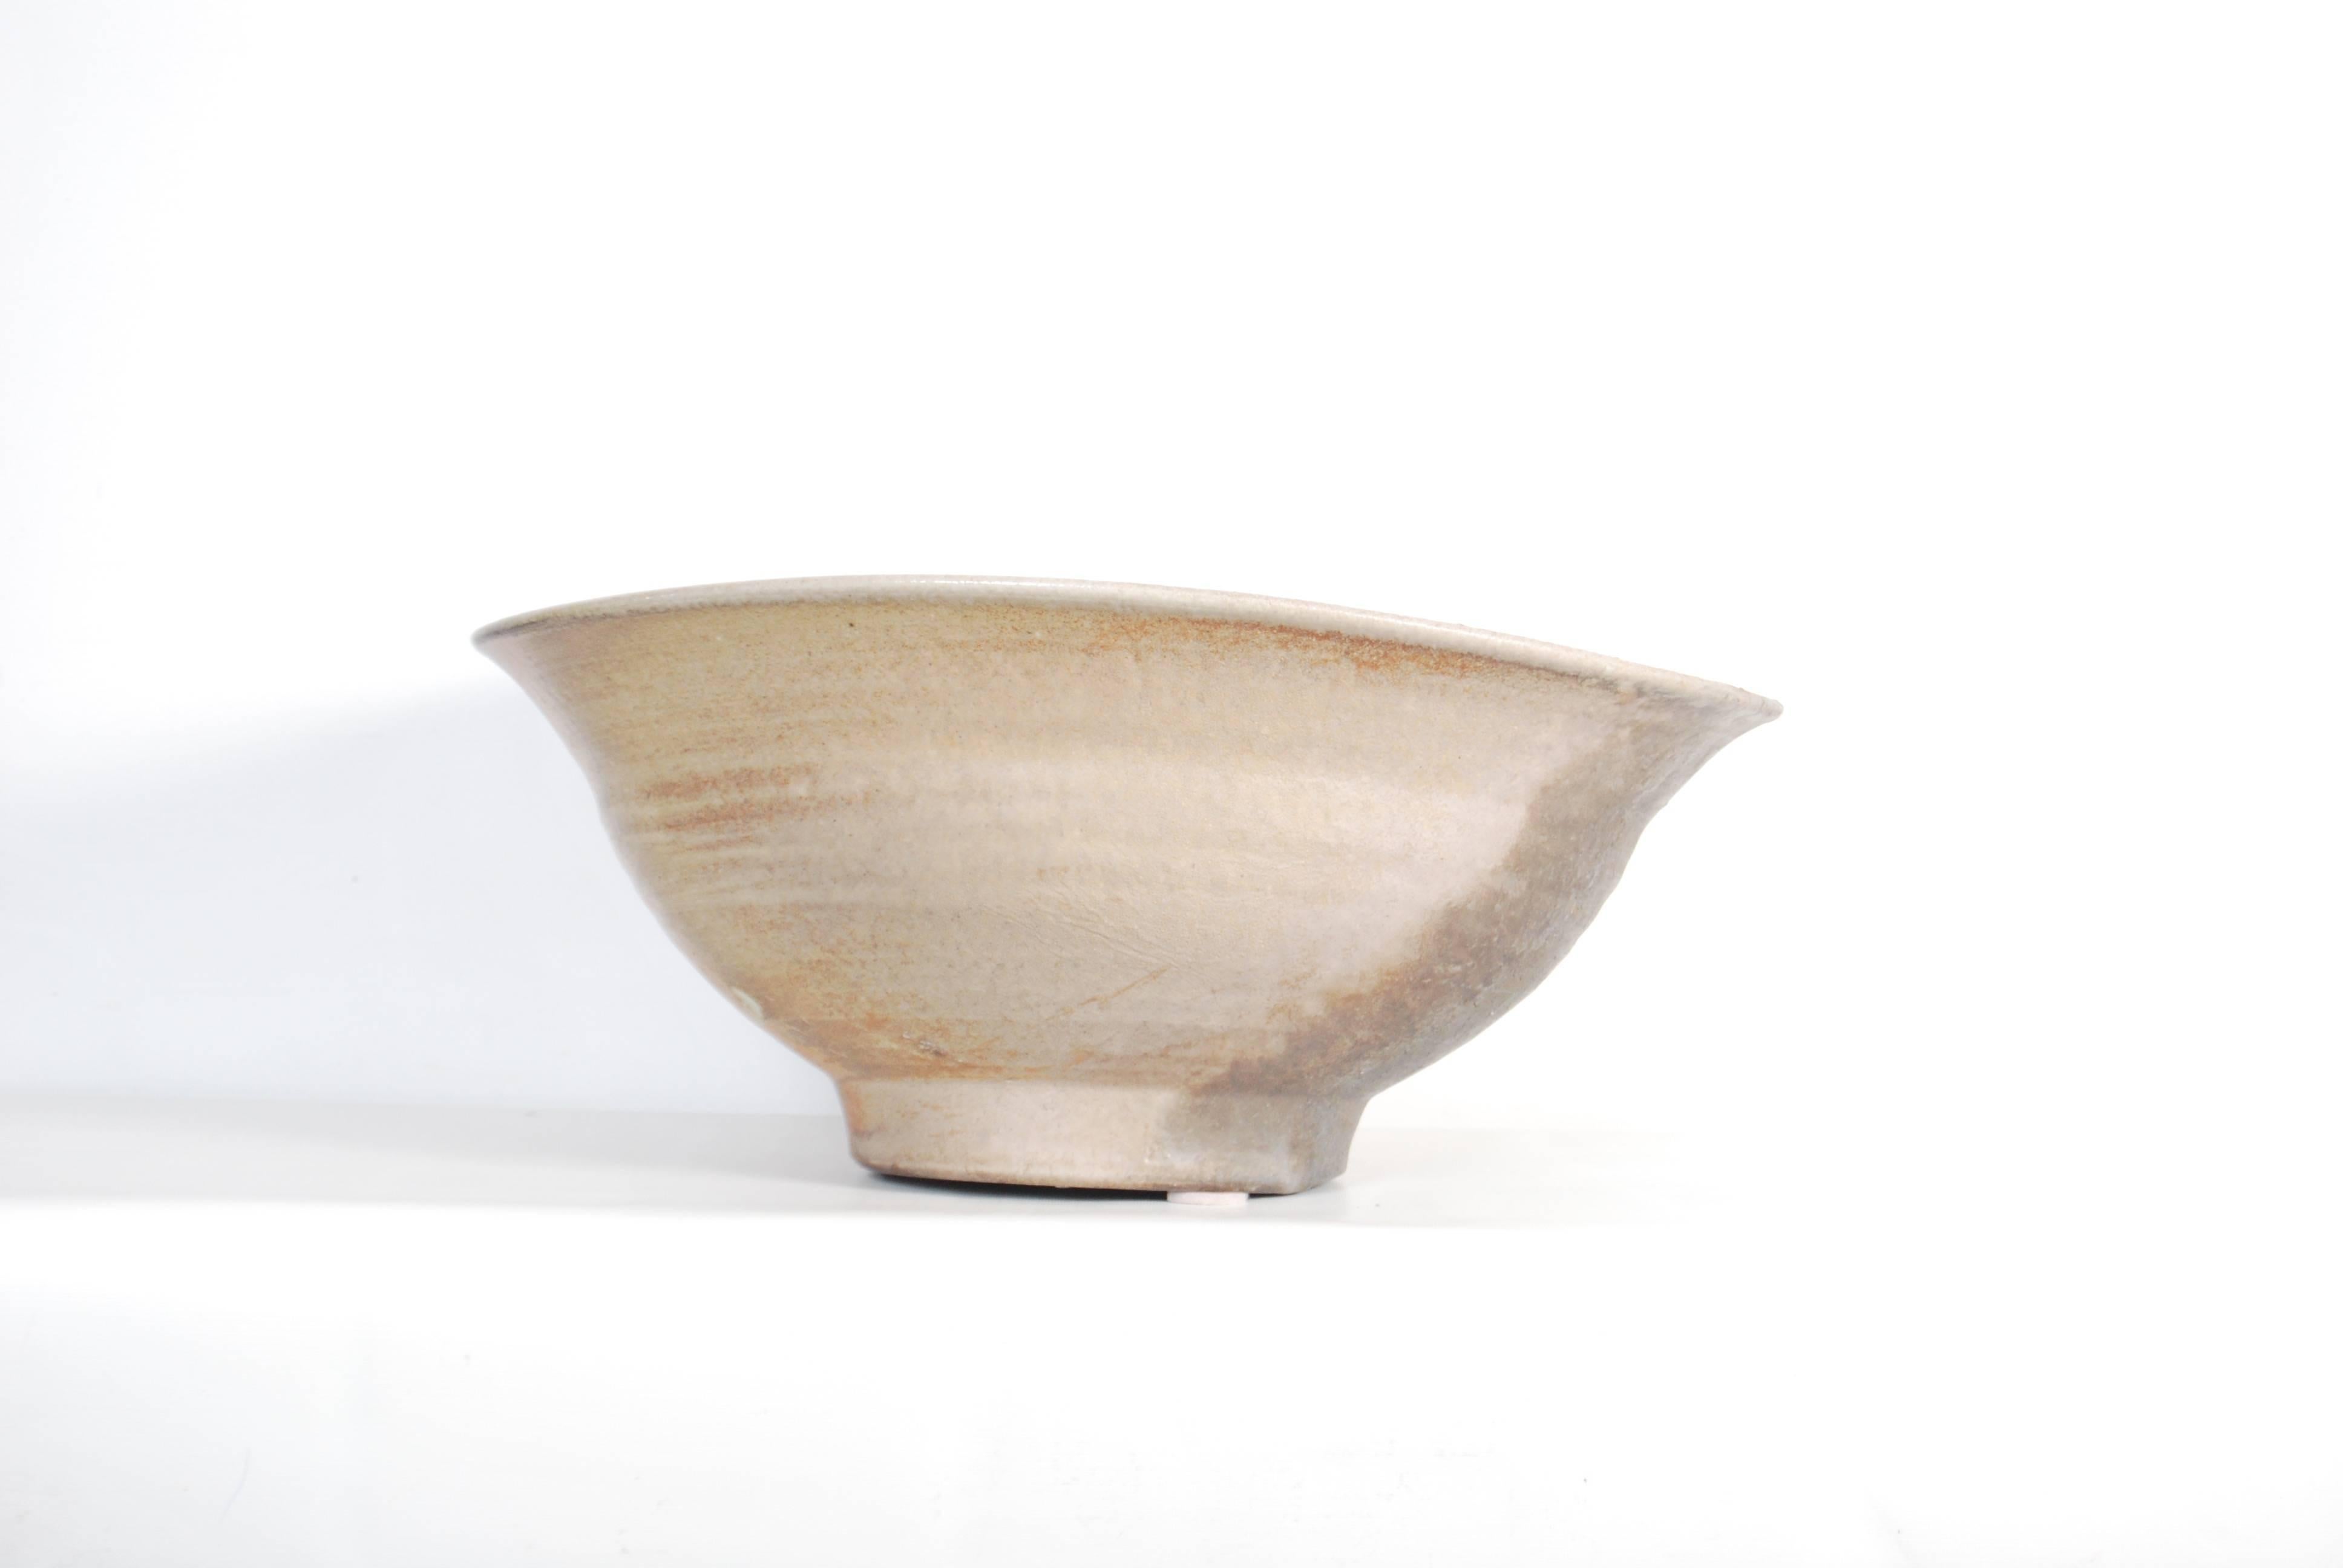 Very large contemporary 'Shigaraki' pottery bowl with an encrusted natural ash glaze by Matsumoto Yoichi. Heavily formed with thick walls tapering to a lightly rolled edge, the piece is finished in variegated of reddish brown with green highlights.